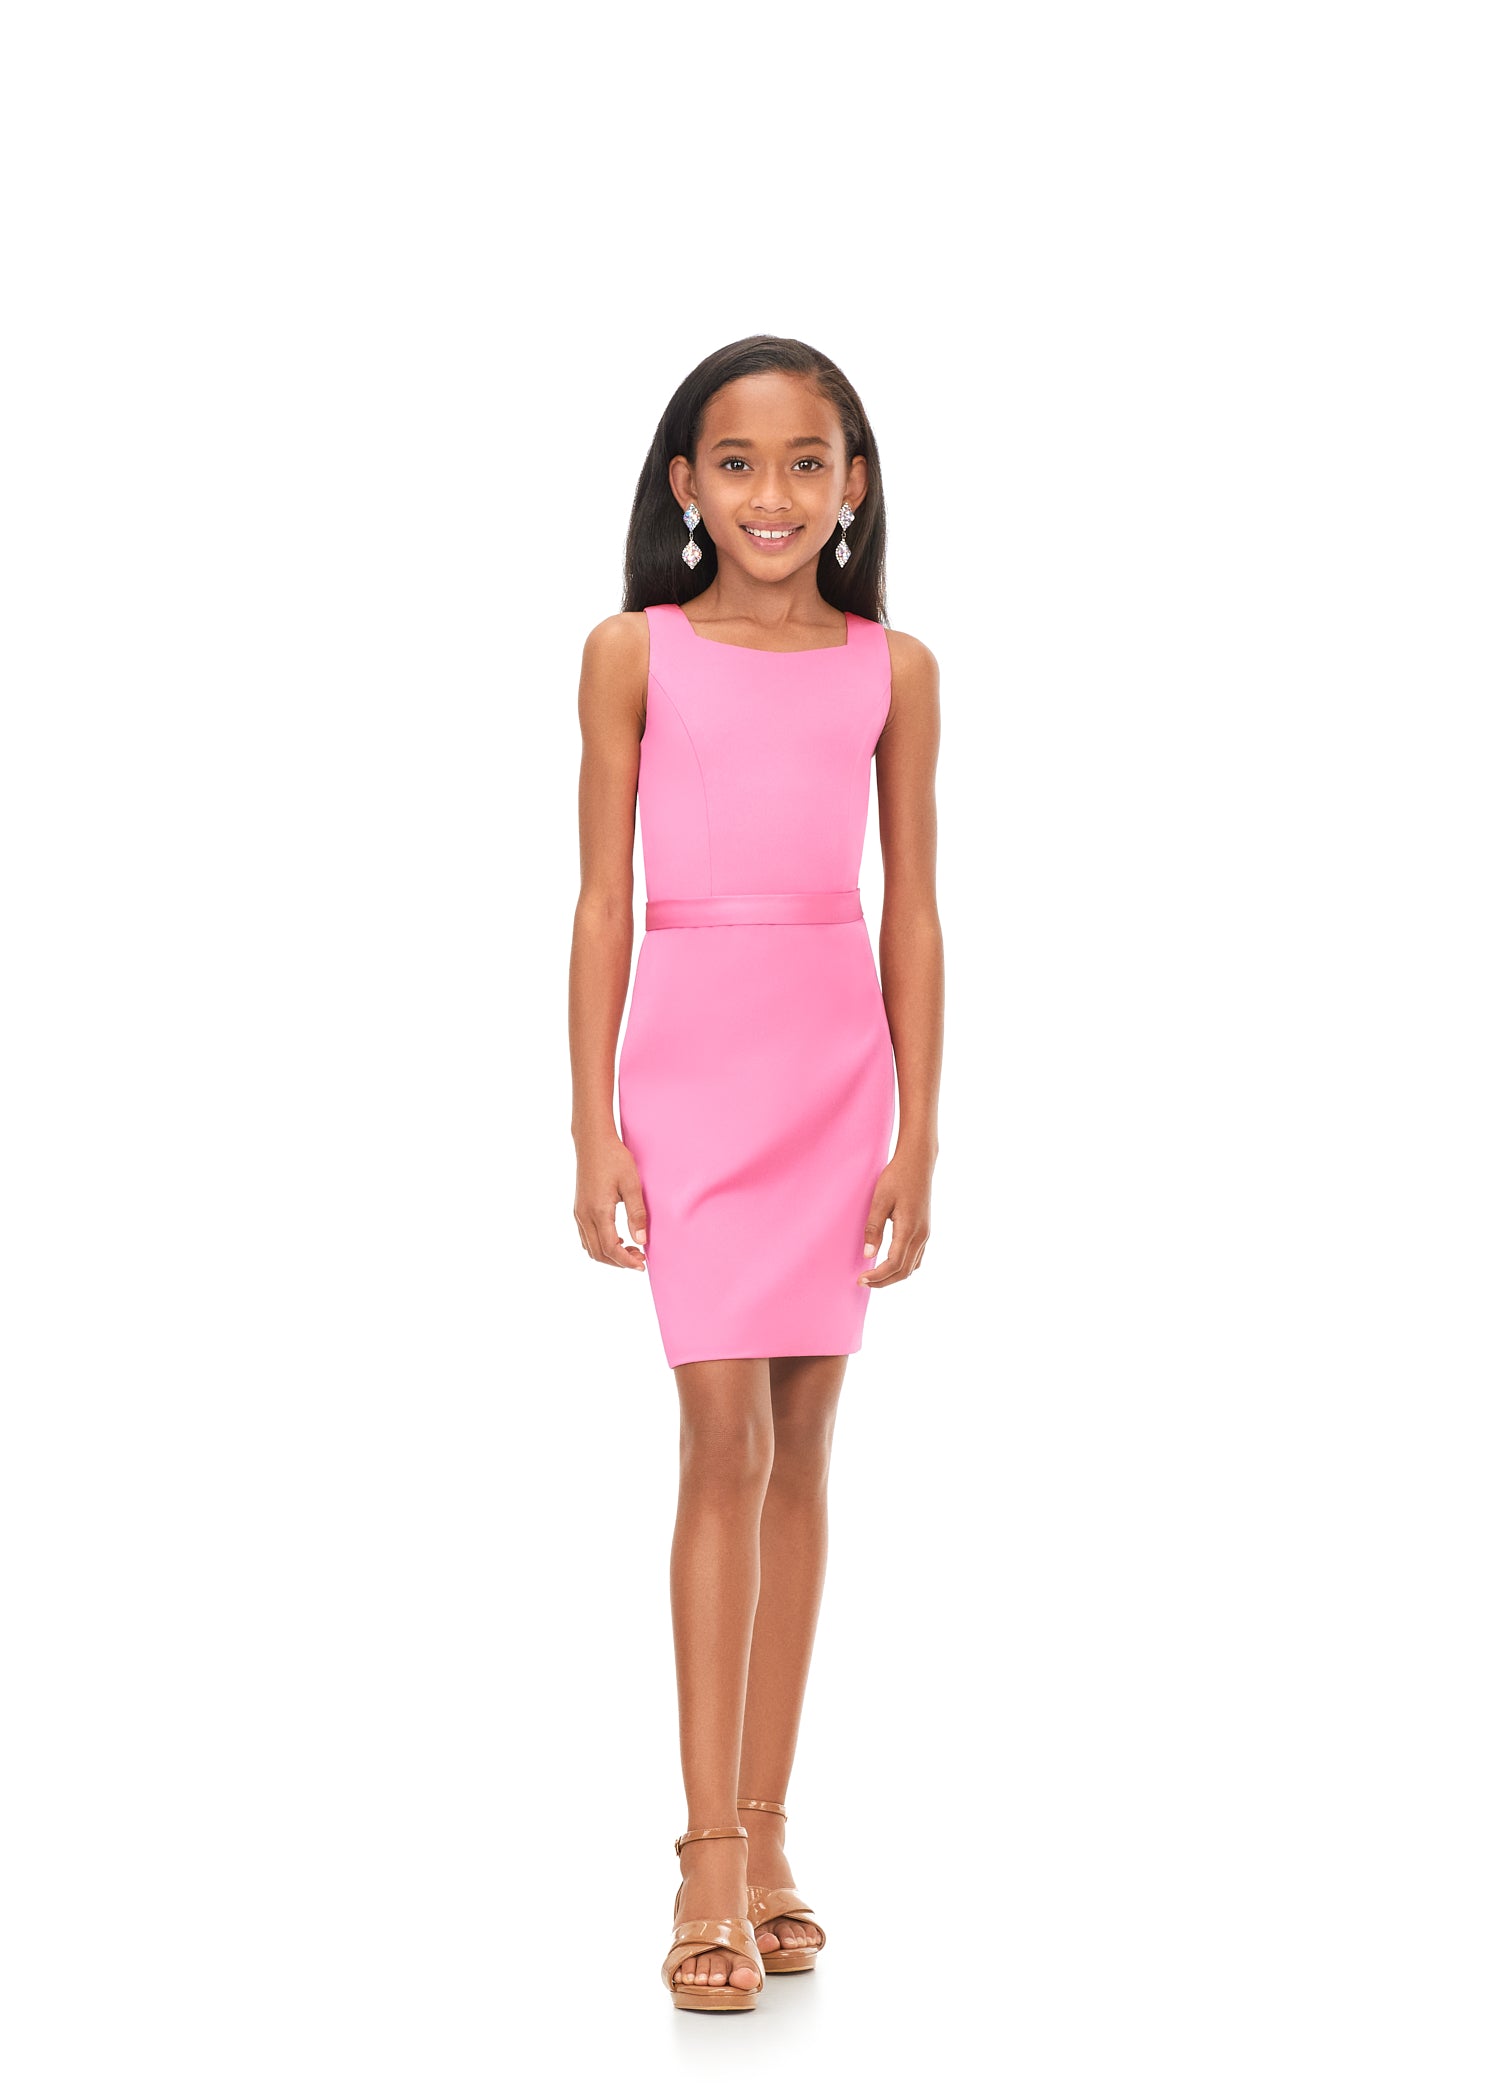 Ashley Lauren Kids 8166 Girls Cocktail Dress with Cape Bow  Two looks in one! This dress features a detachable, bow-adorned cape. Underneath the cape is a simple and stunning crepe dress perfect for your next event.